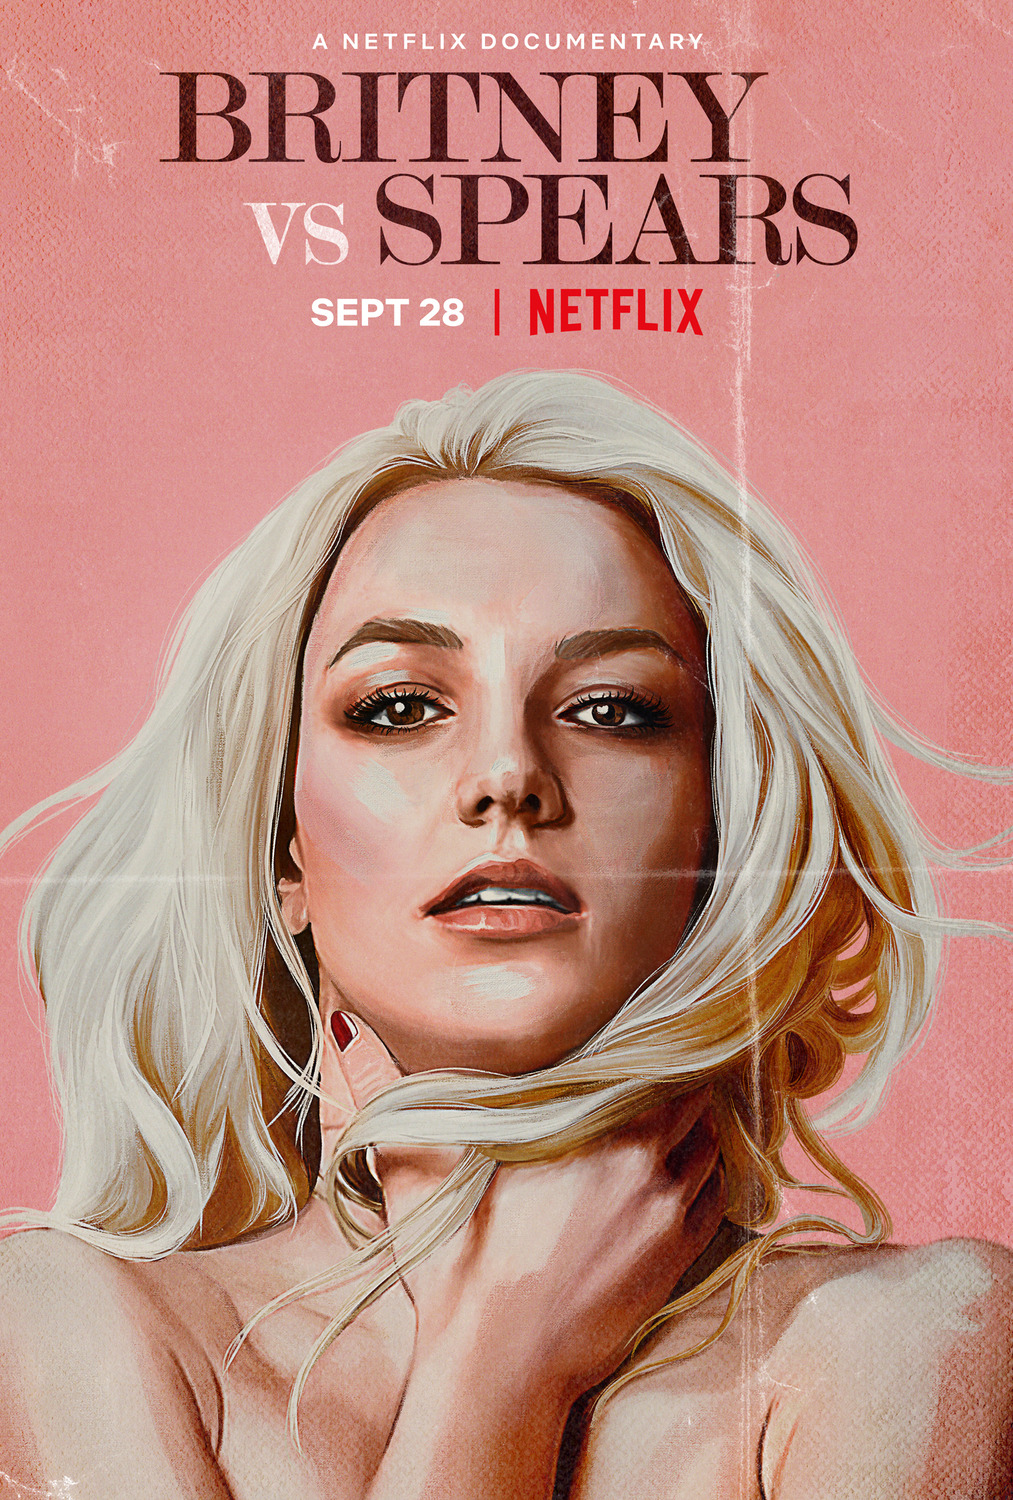 Extra Large Movie Poster Image for Britney Vs. Spears 